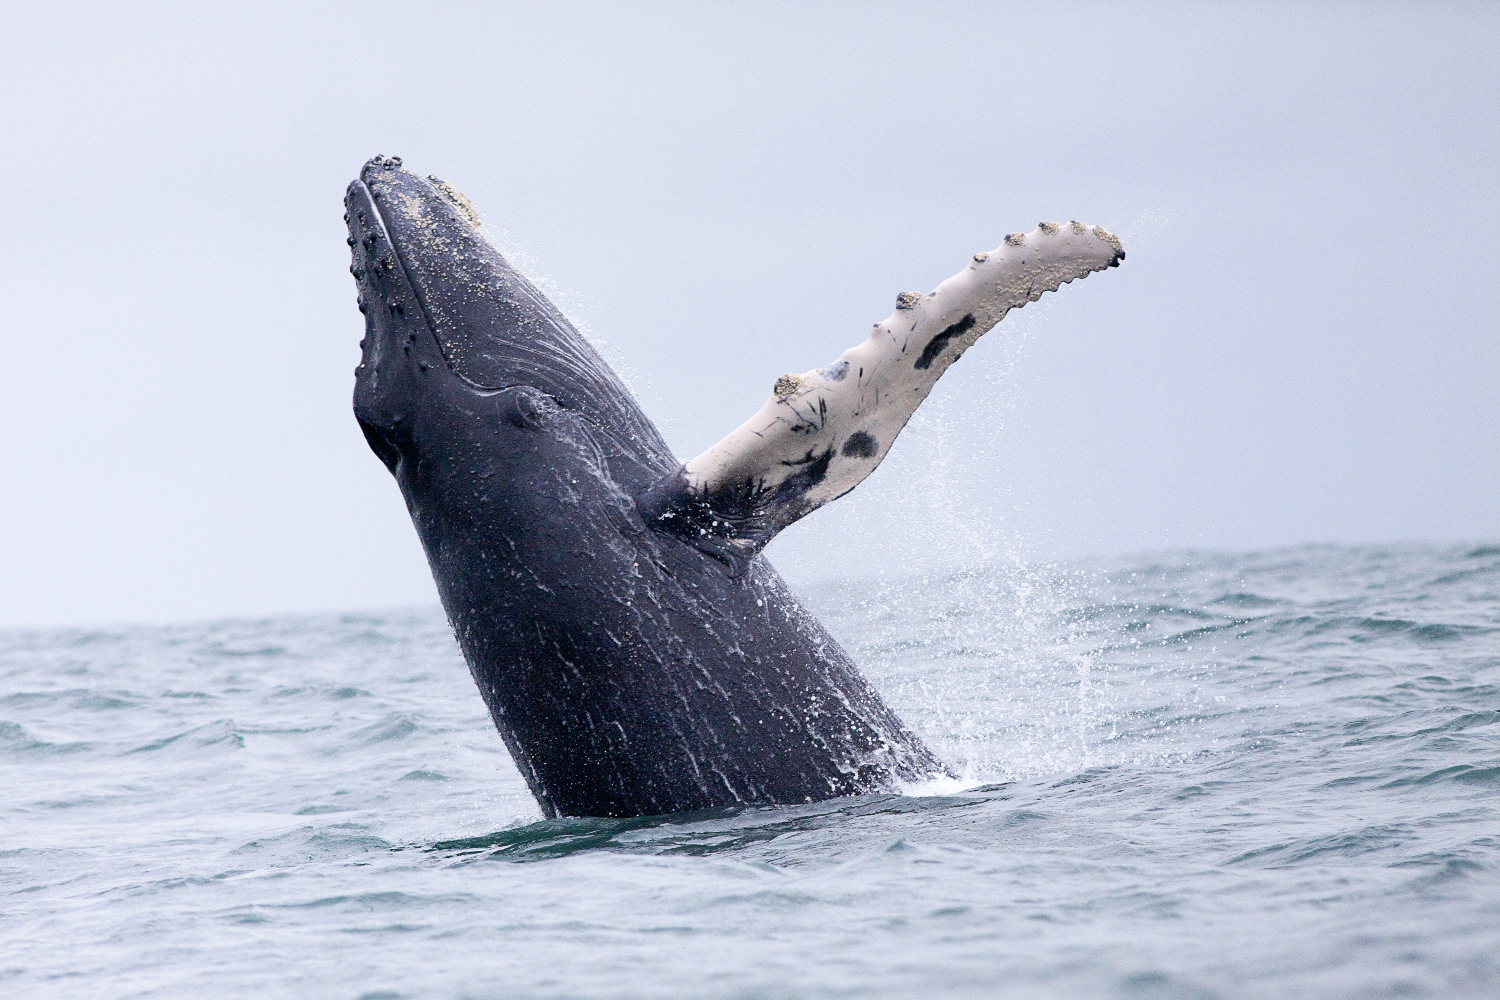 Humpback whales breach along the Osa Peninsula. Image by LuismiX / Moment / Getty